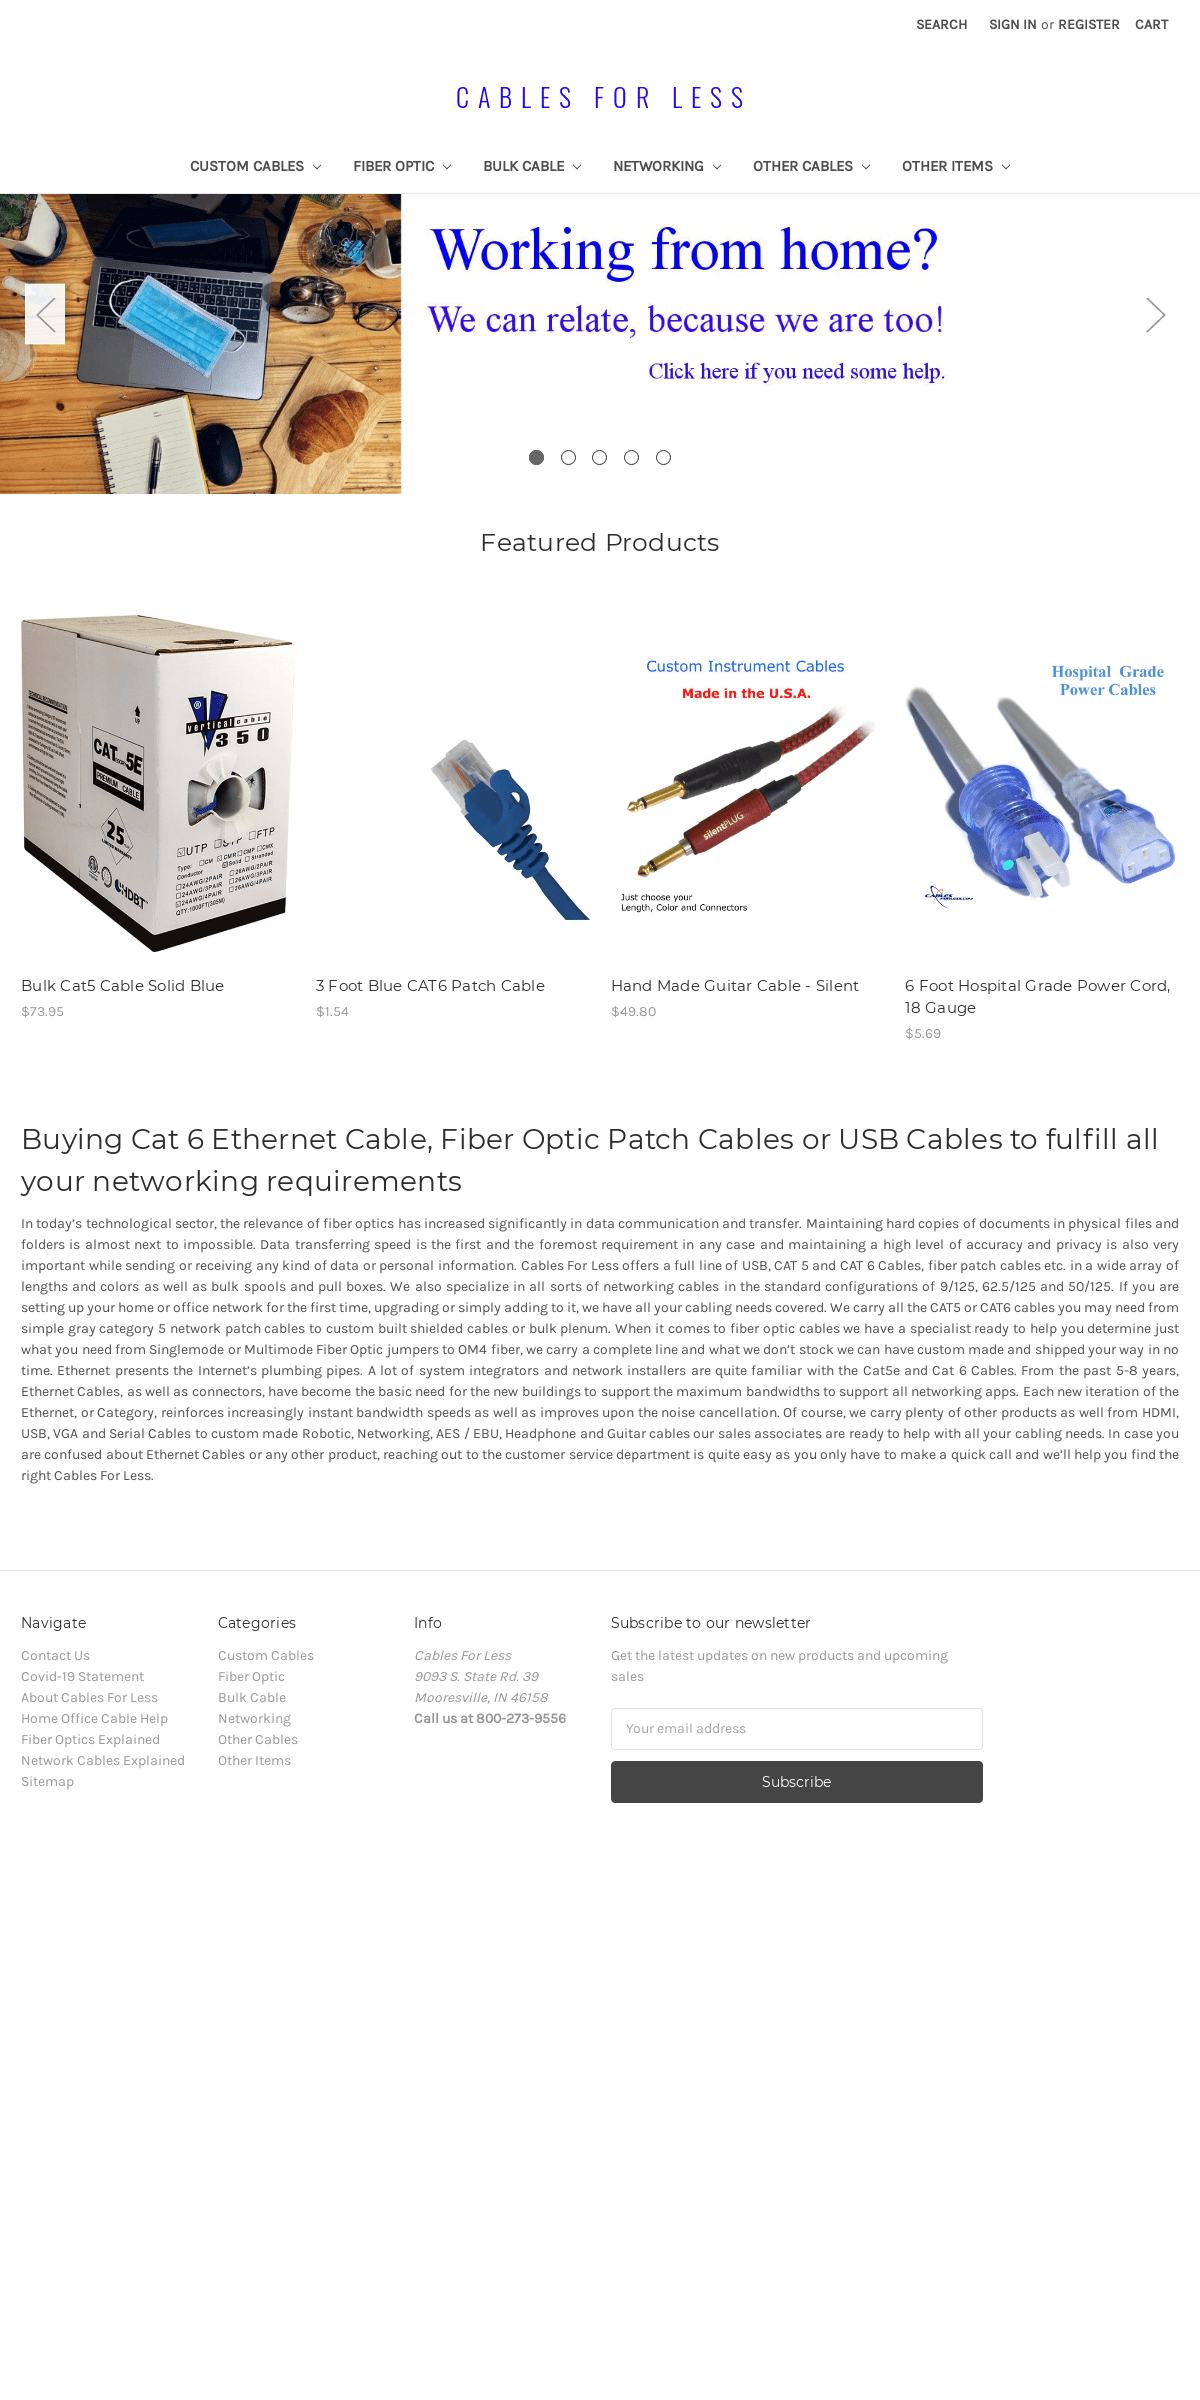 A complete backup of cablesforless.com